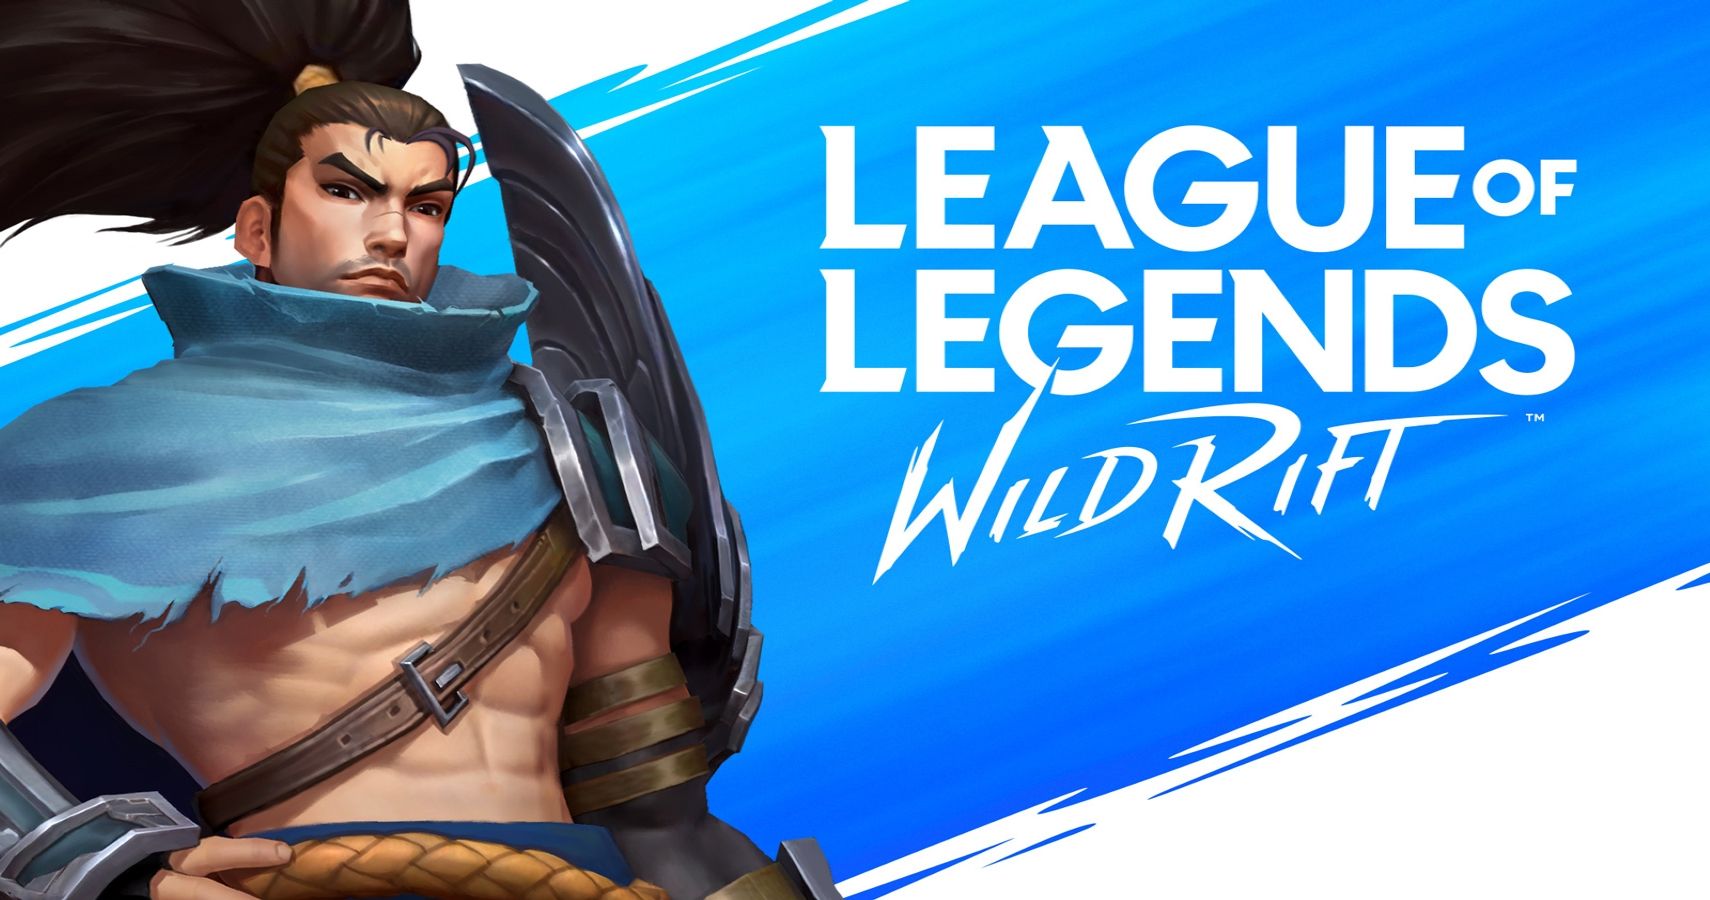 League of Legends: Wild rift cover art with Yasuo